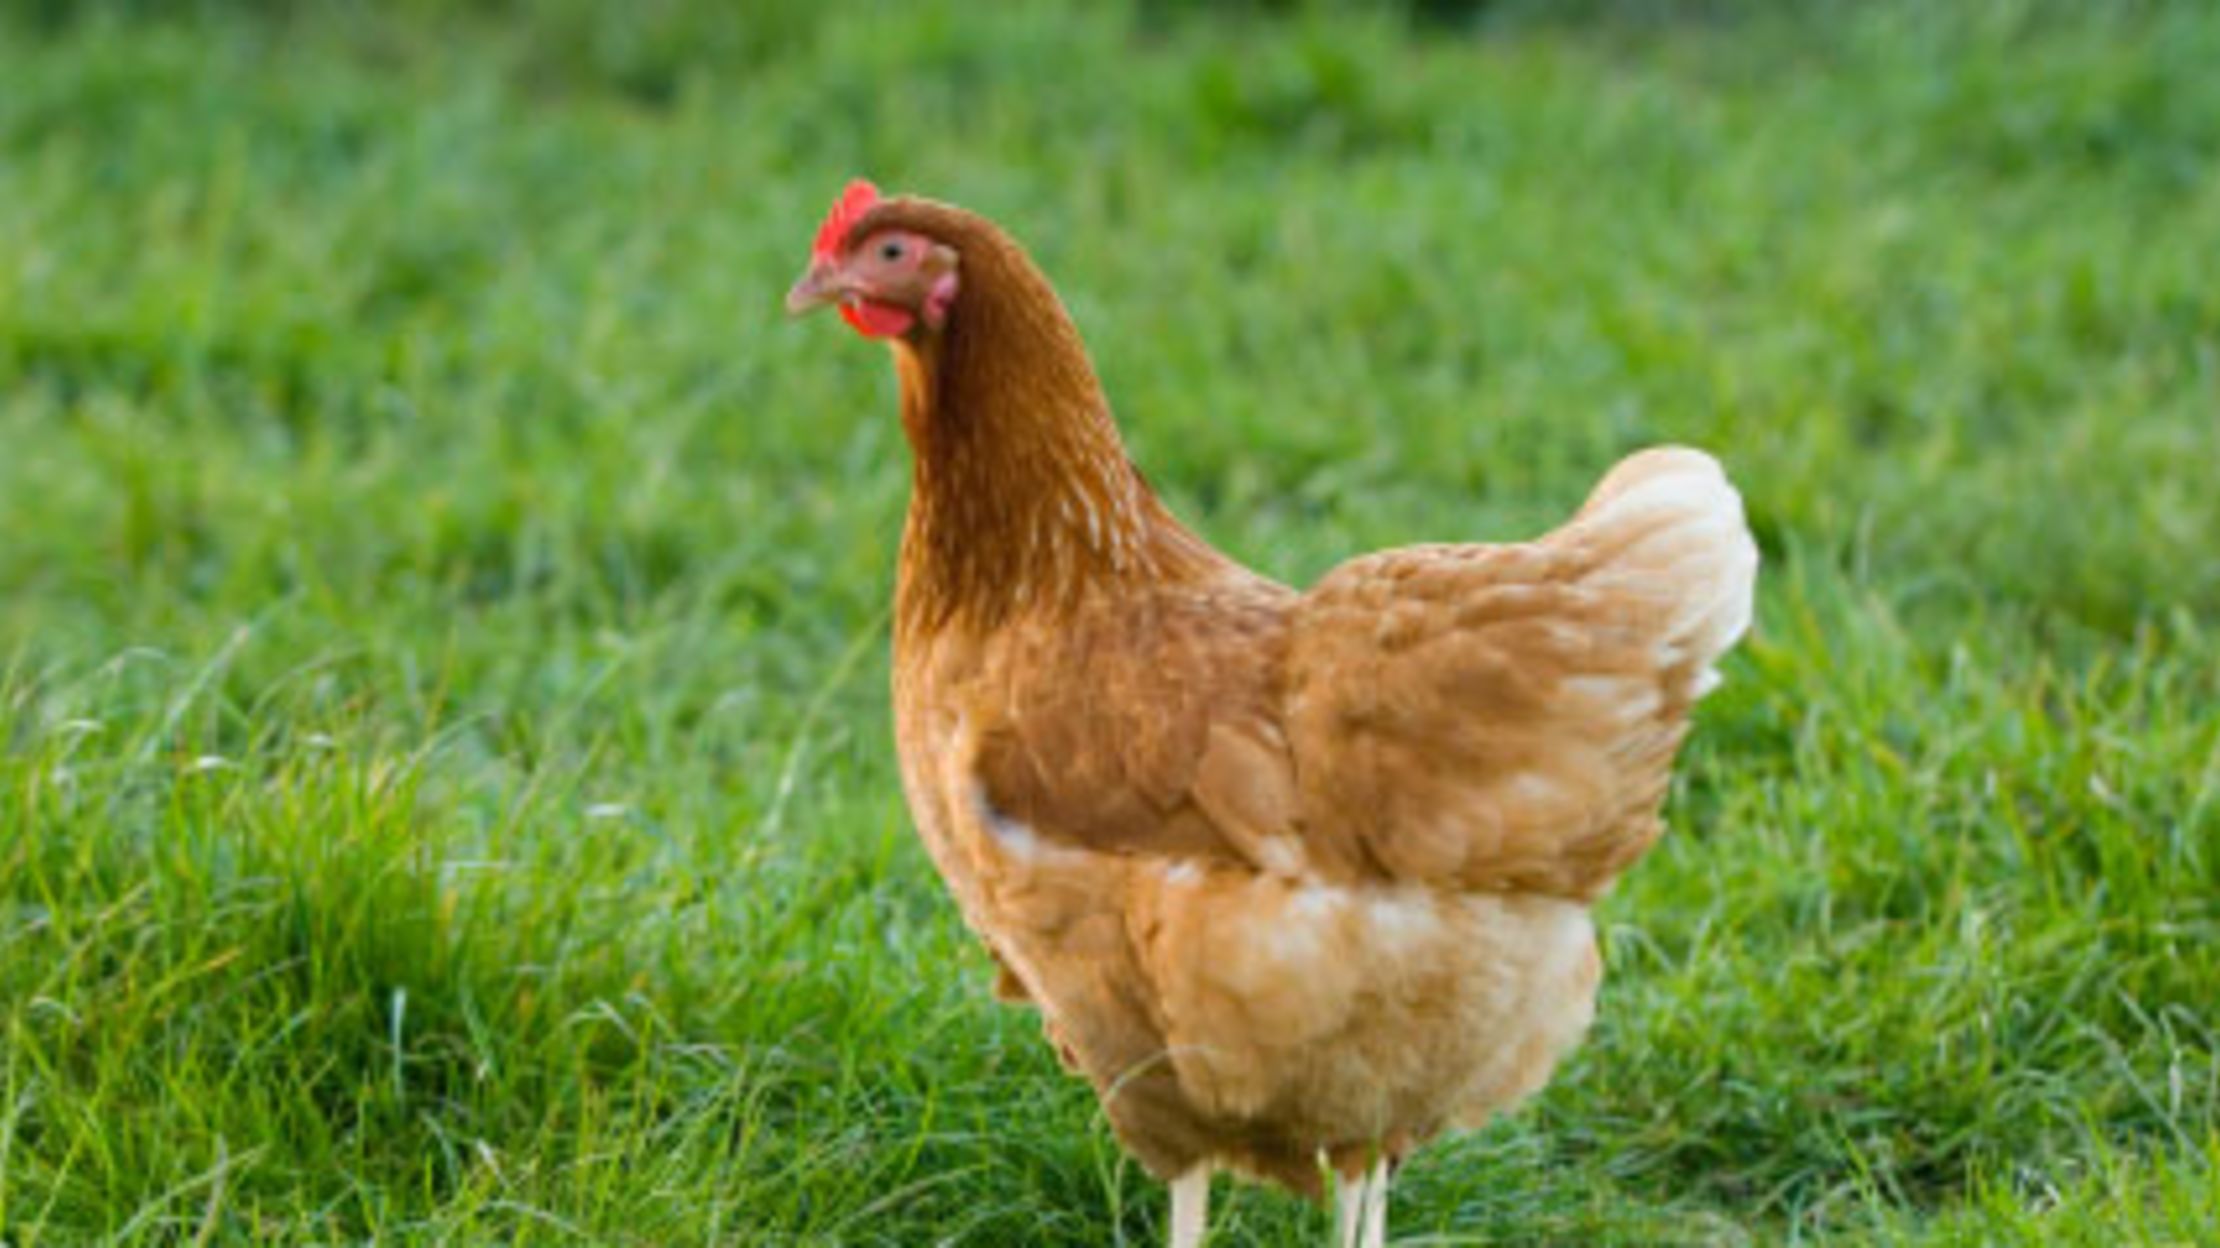 Do Backyard Chickens Need More Rules? | KPBS